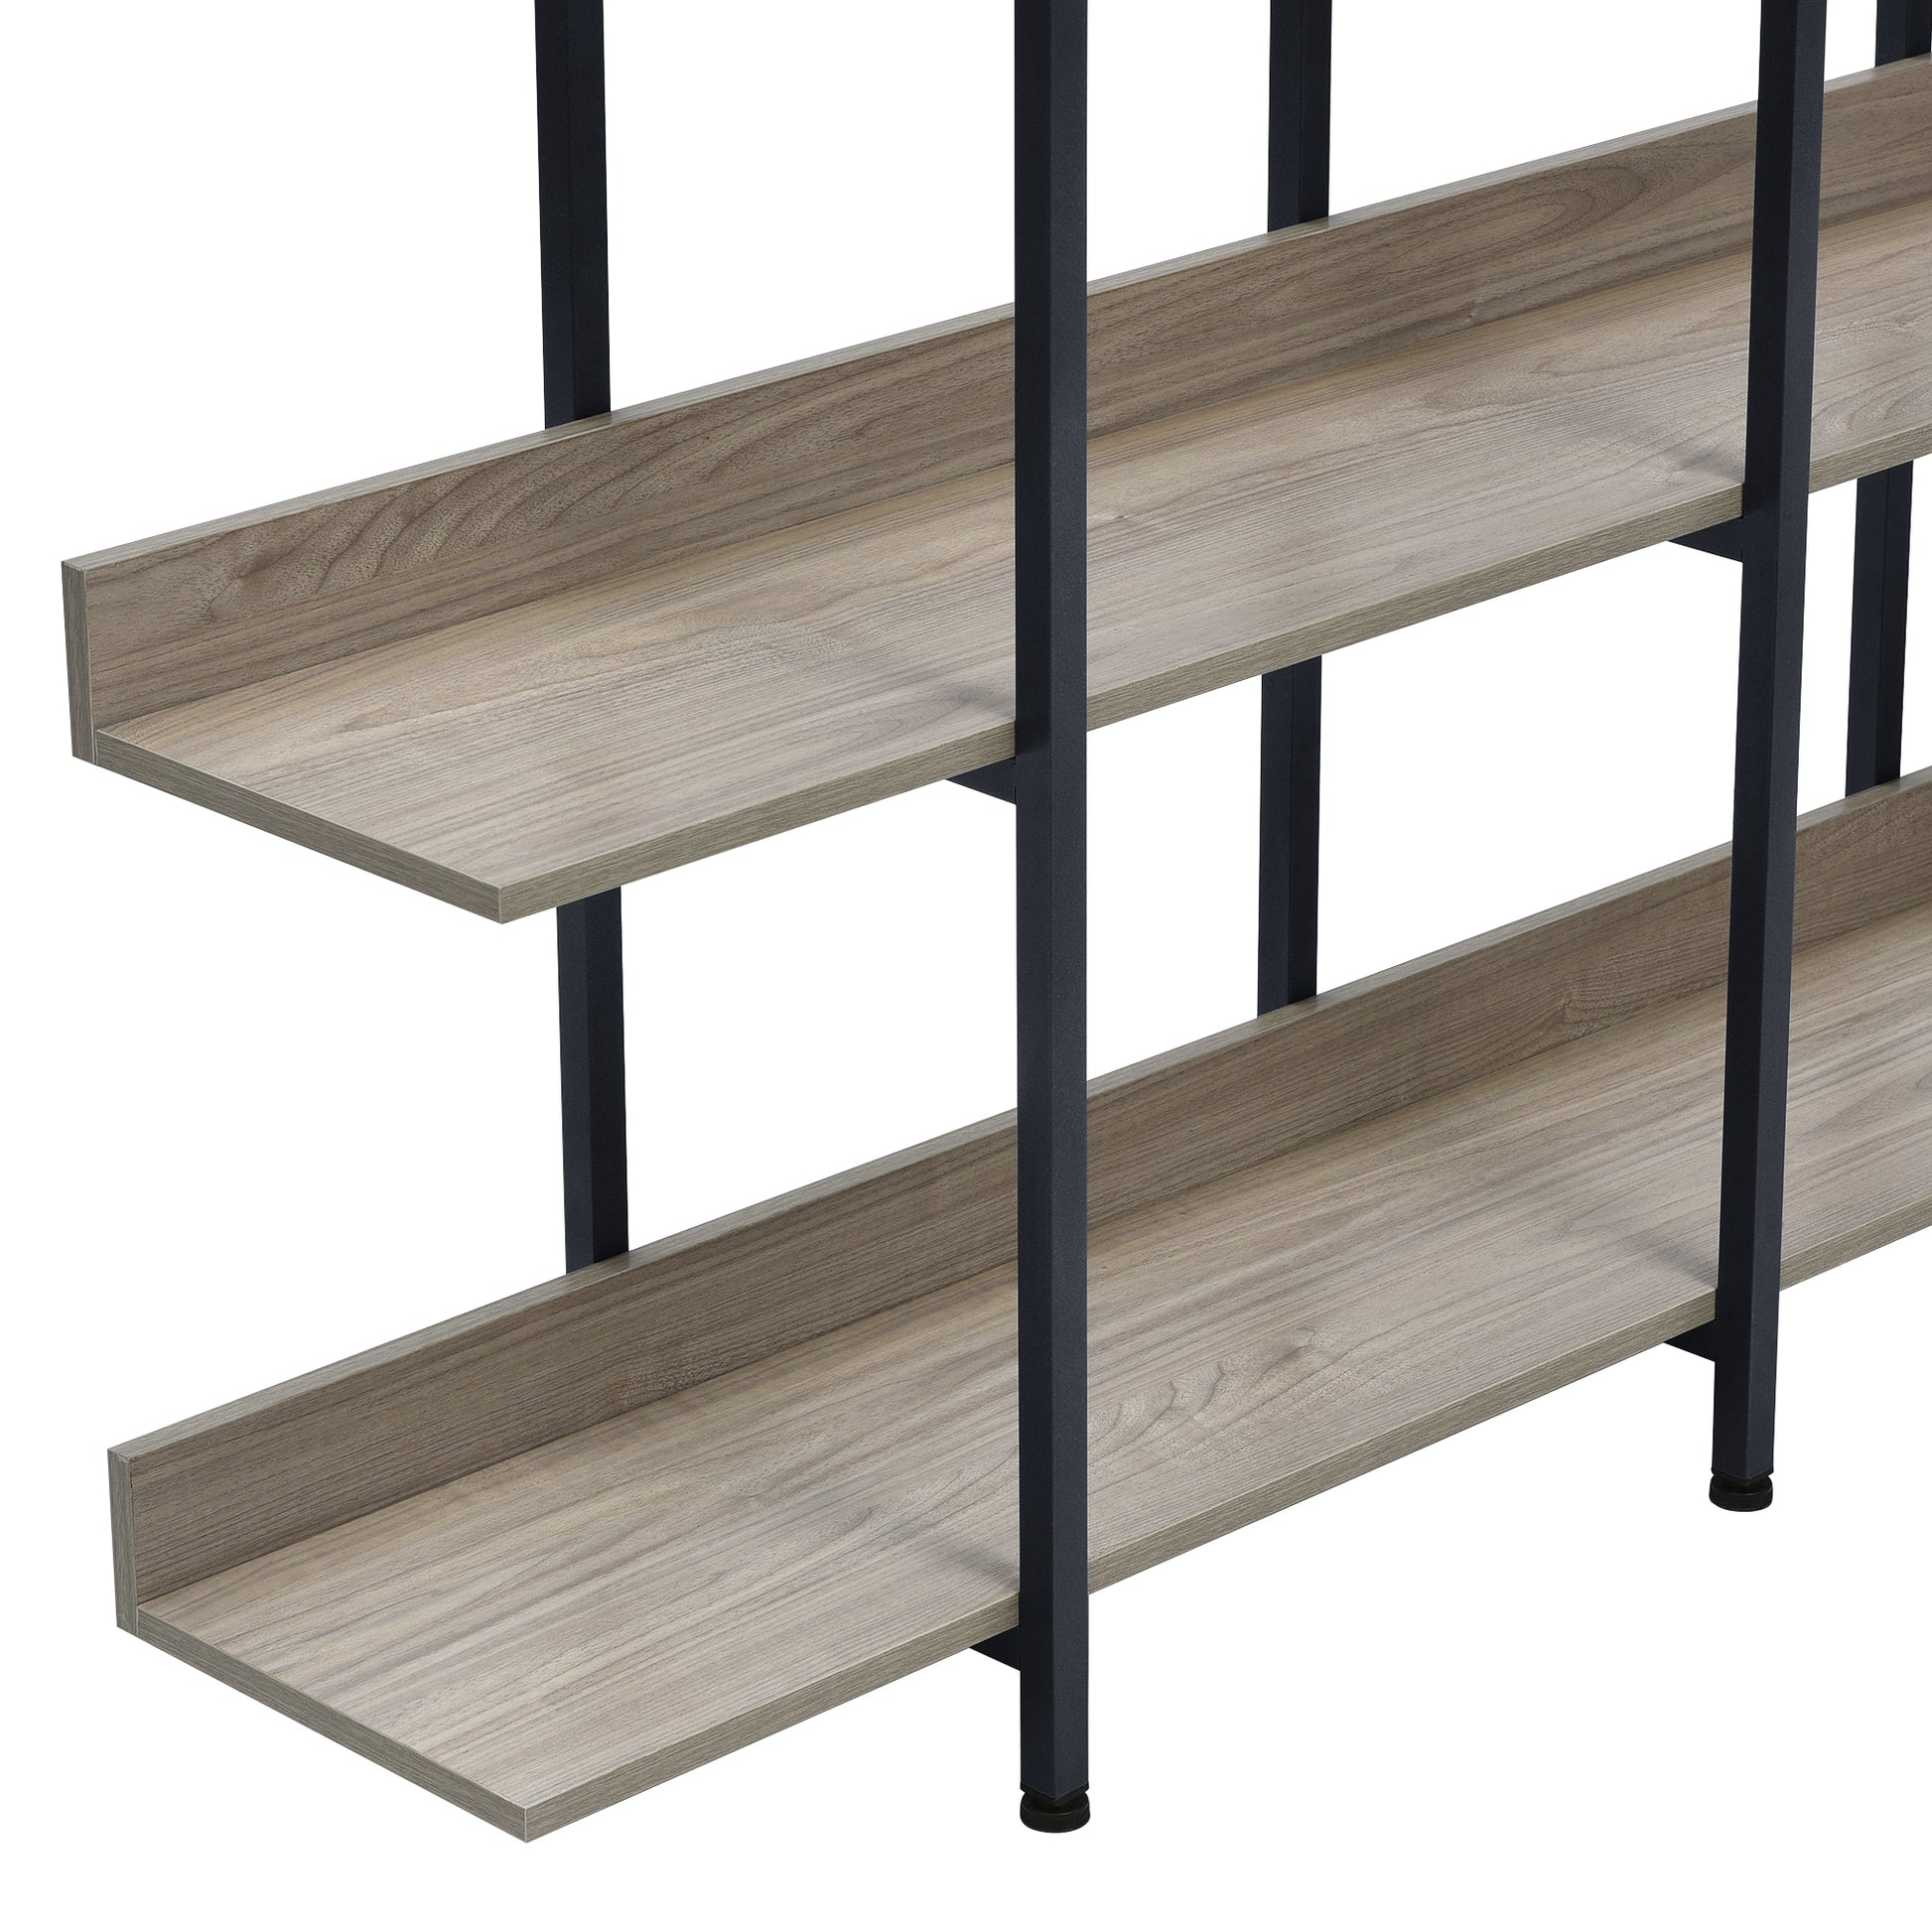 BY Vintage Industrial Style 5-Tier Bookcase - Gray